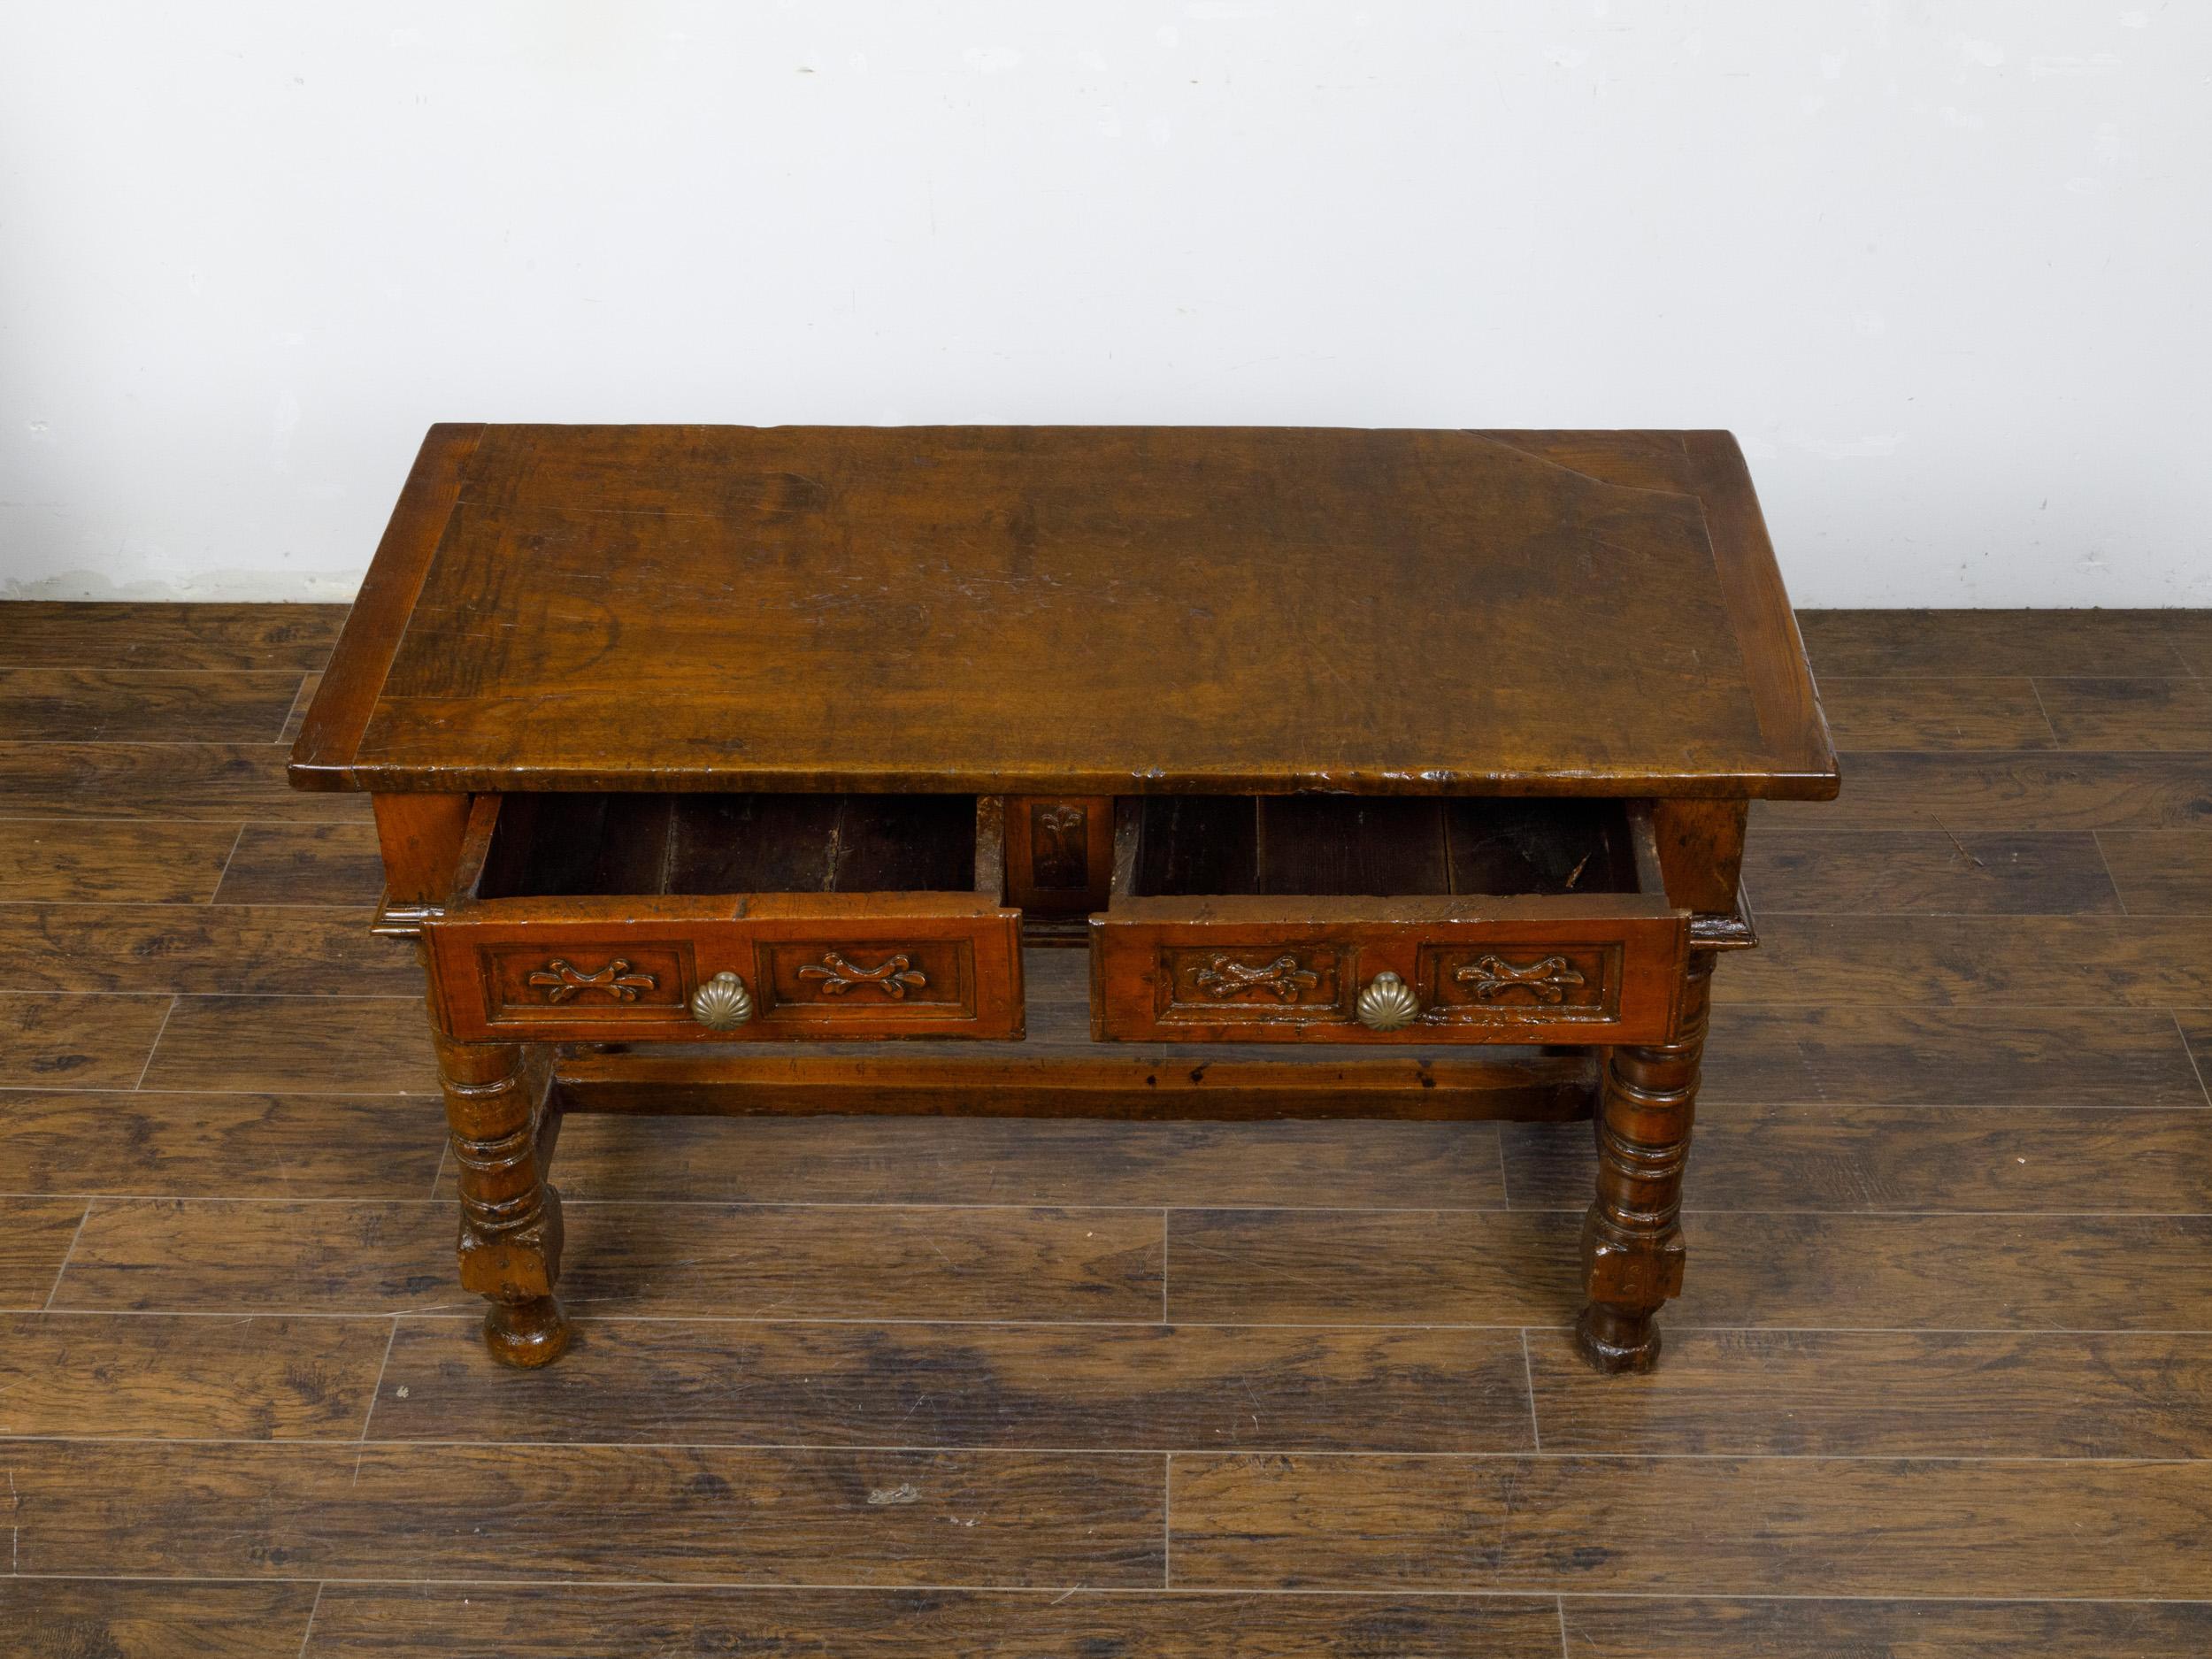 18th Century Spanish Walnut Console Table with Carved Drawers and Baluster Legs For Sale 4